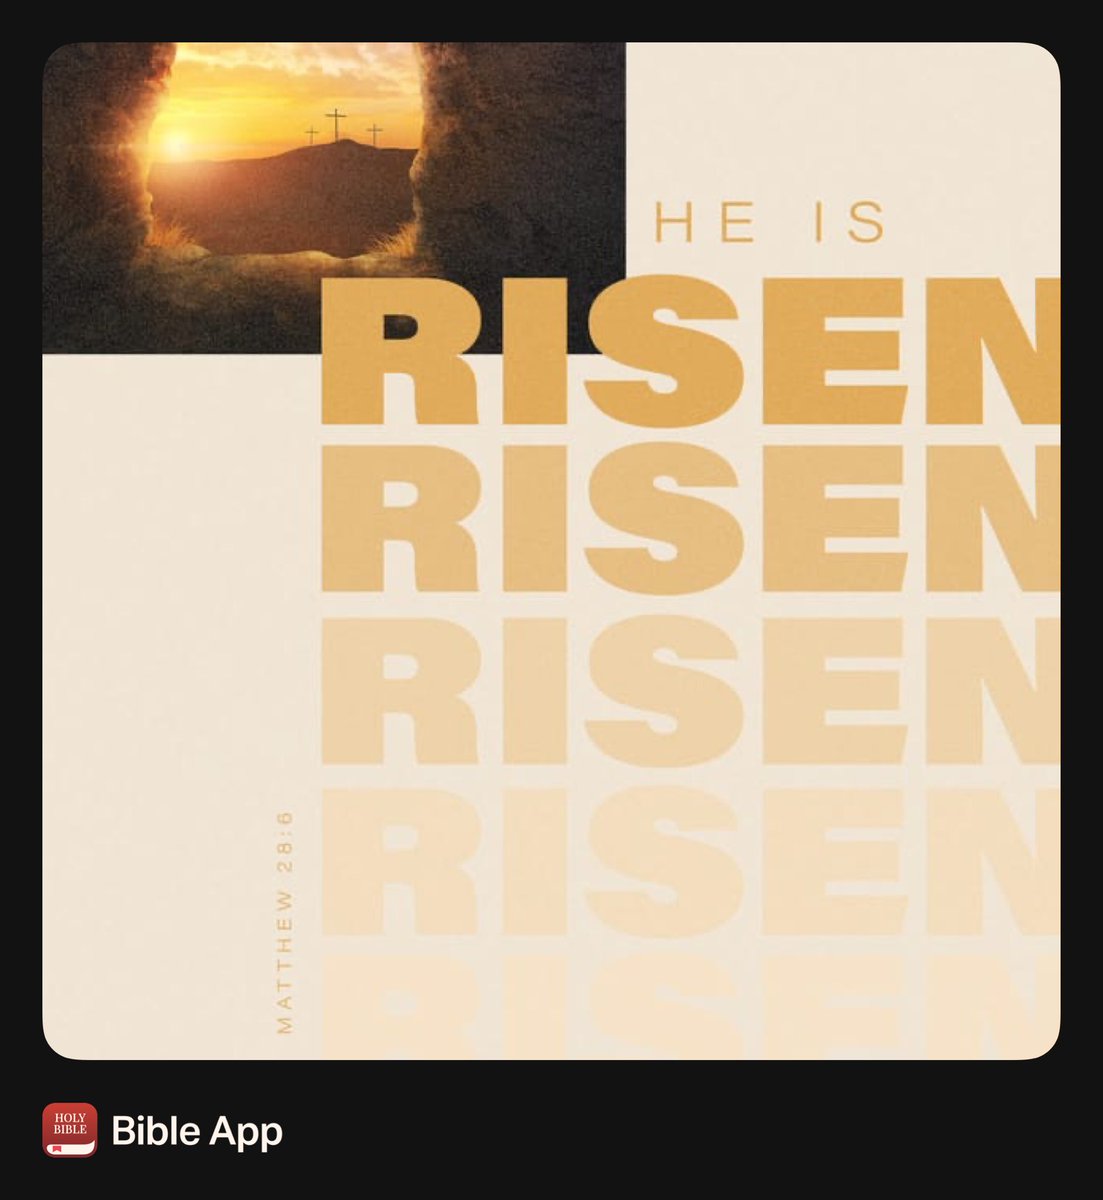 Christ the Lord is Risen today! Alleluia!